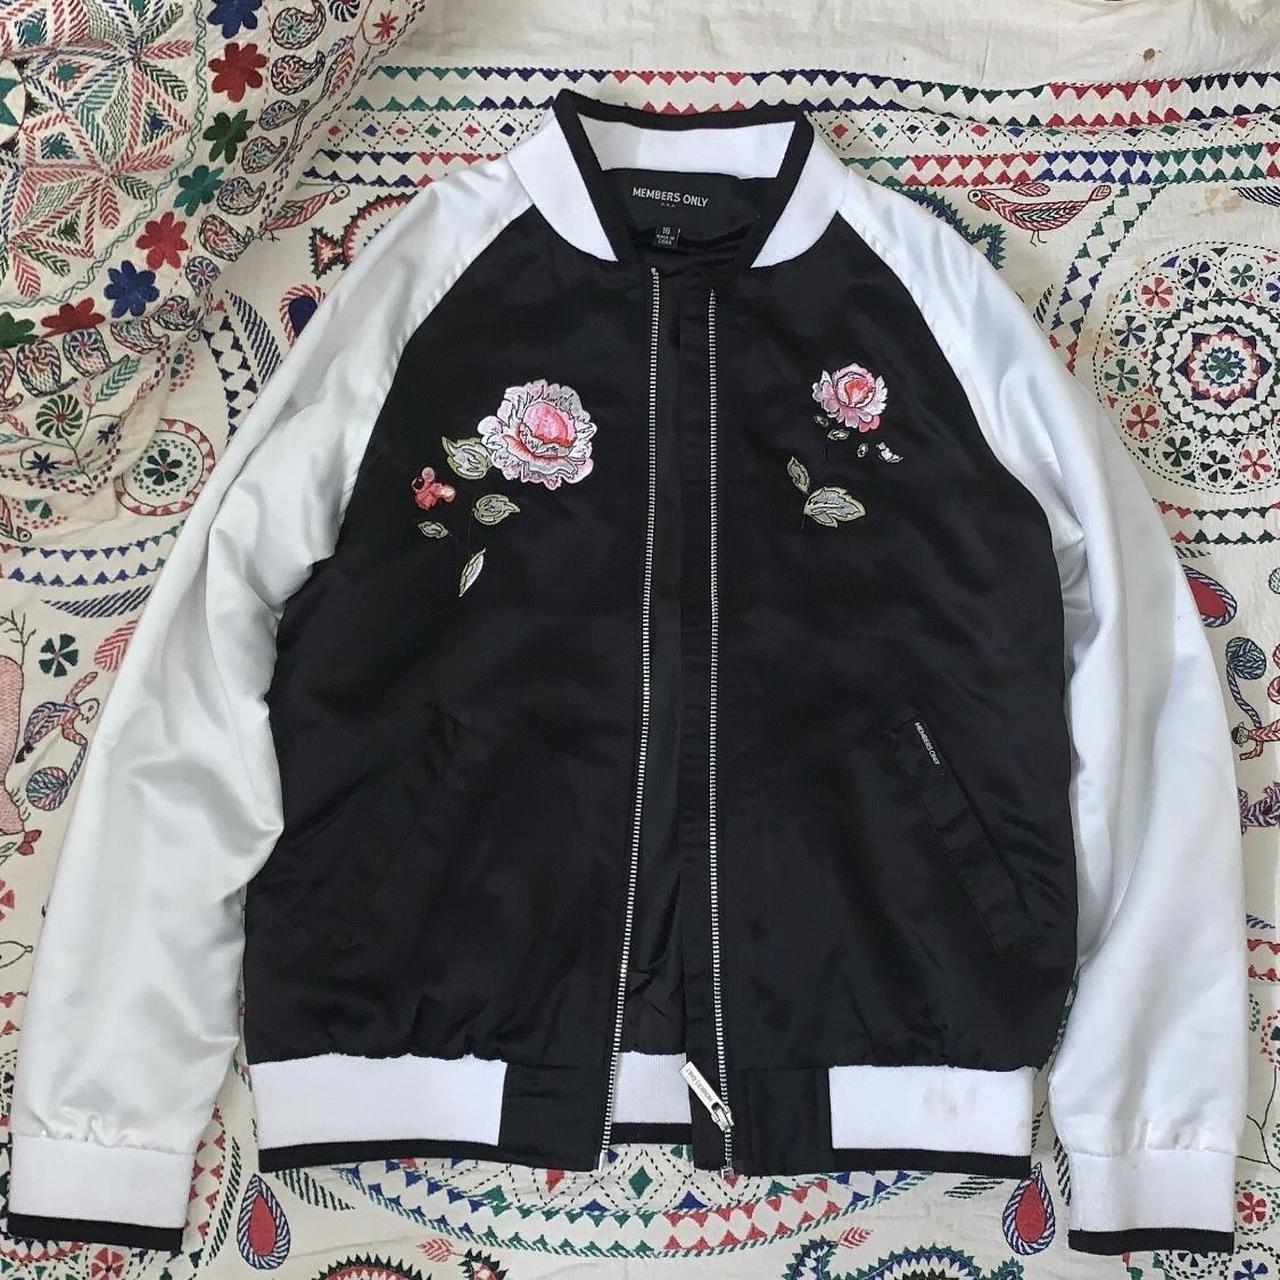 Members Only Women's Black and White Jacket (2)